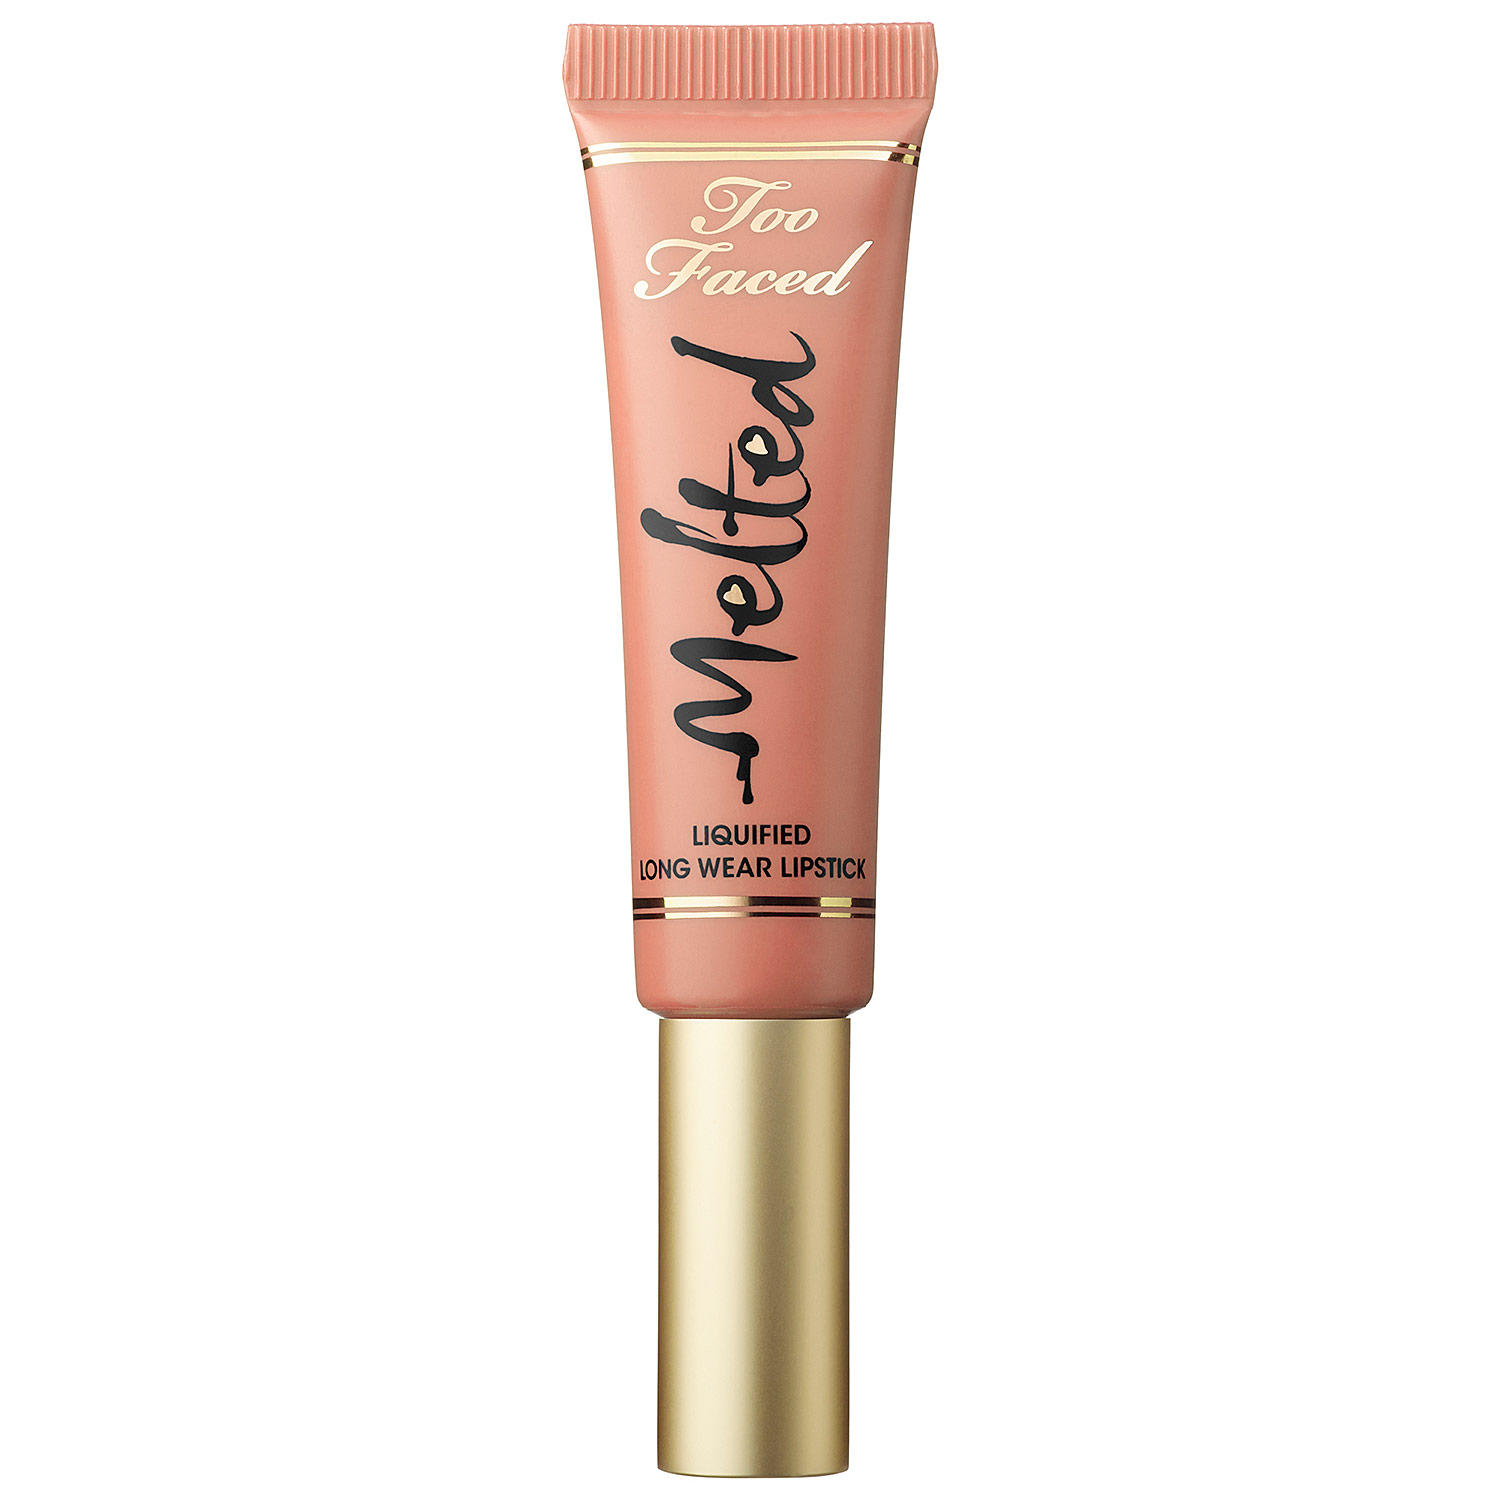 Too Faced Liquified Long Wear Lipstick Melted Sugar